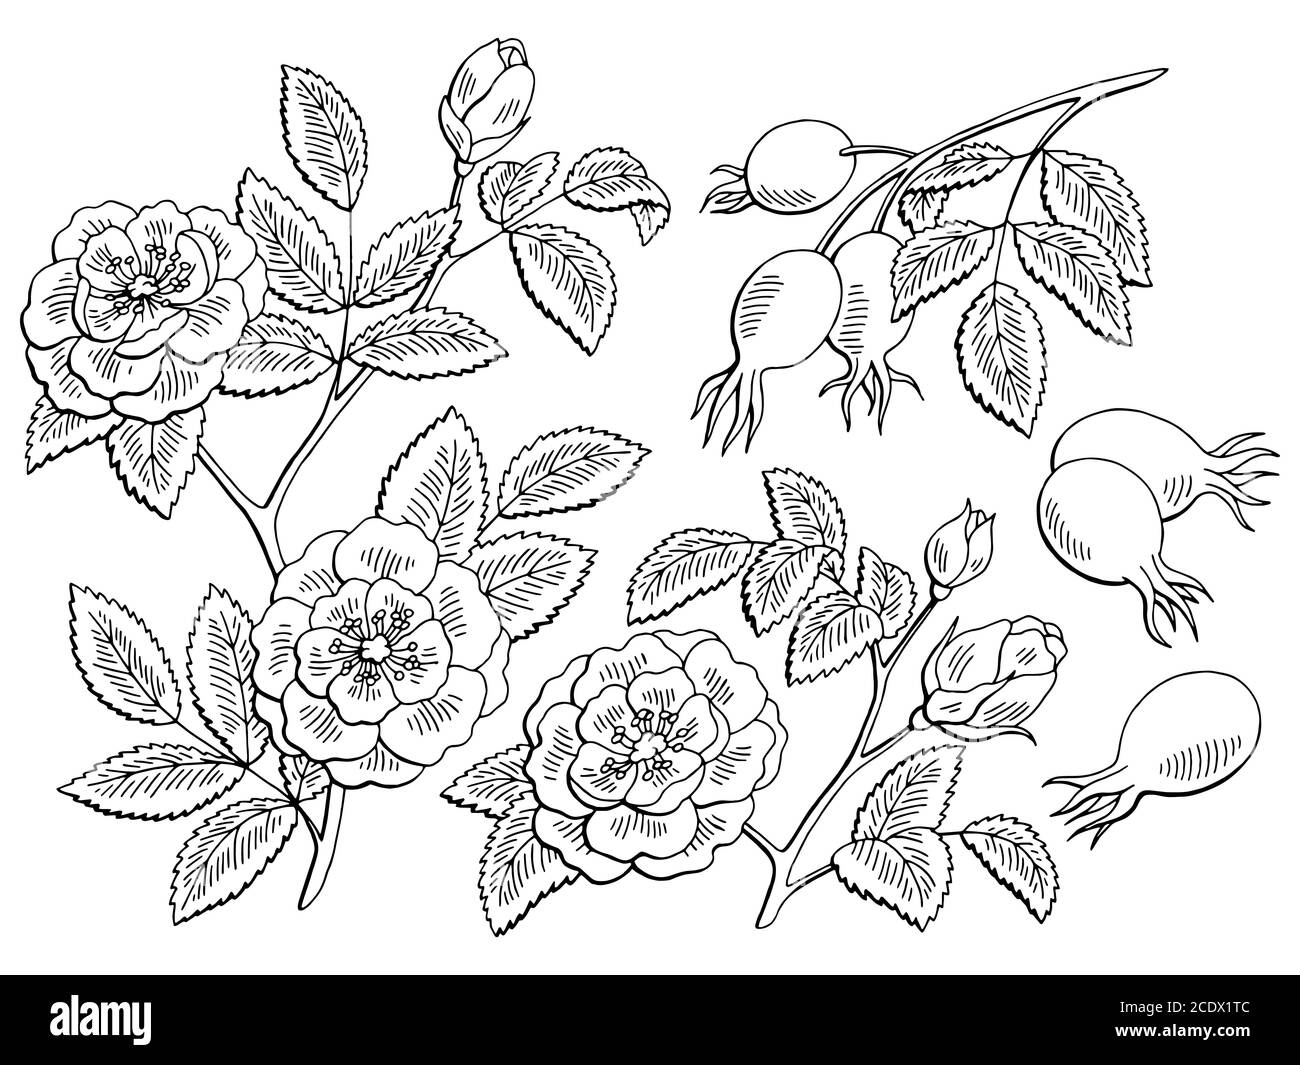 Dog rose flower berry plant graphic black white isolated sketch set illustration vector Stock Vector